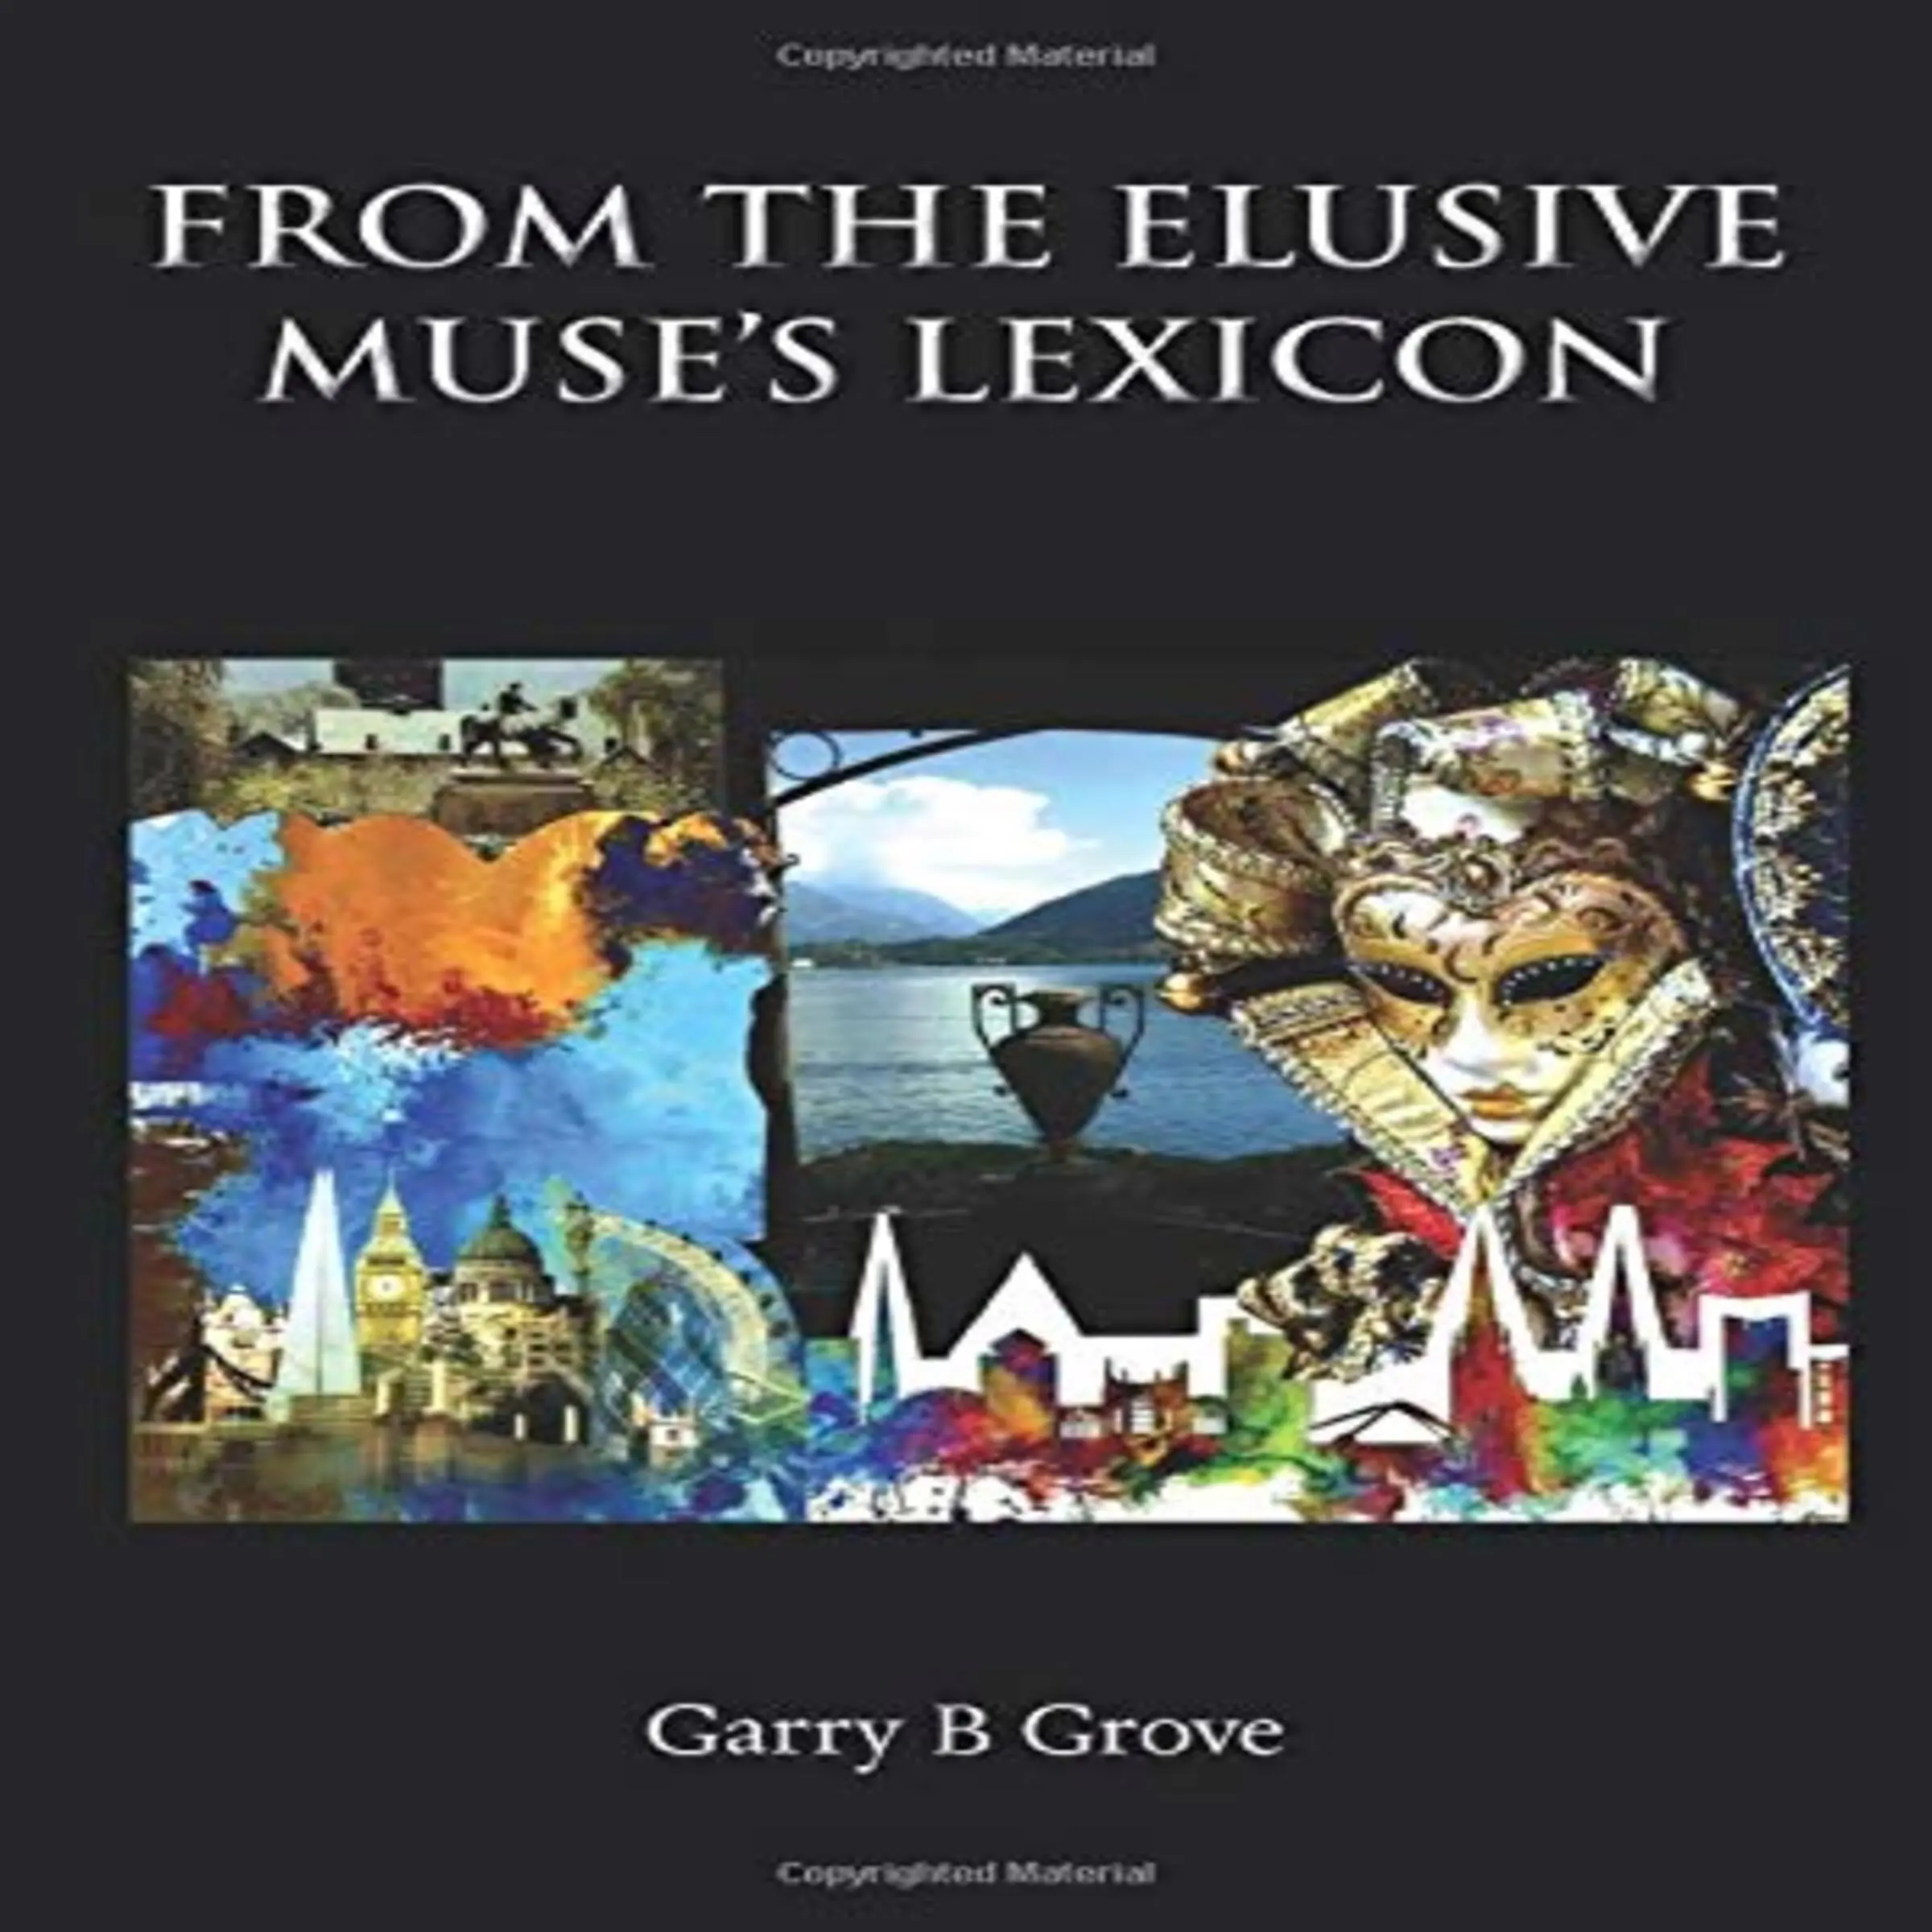 From The Elusive Muse's Lexicon by Garry B Grove Audiobook